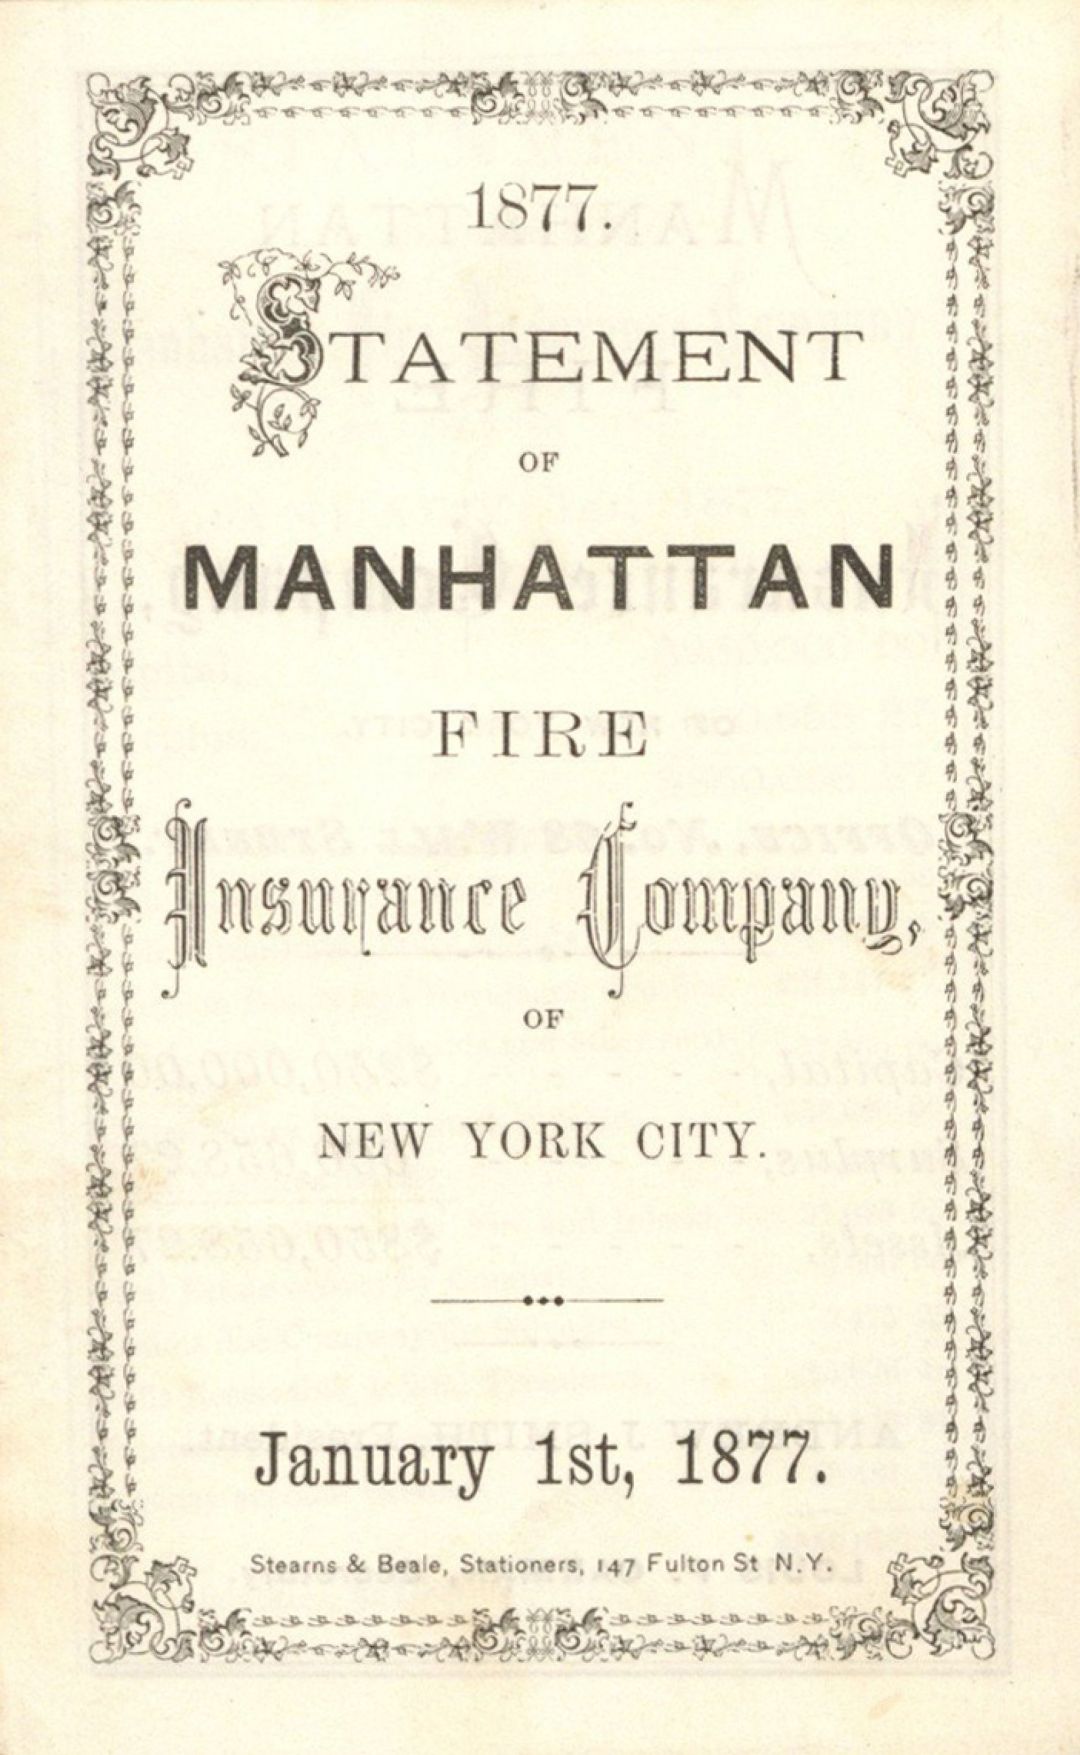 Statement of Manhattan Fire Insurance Co. of New York City dated 1877 -  Insurance